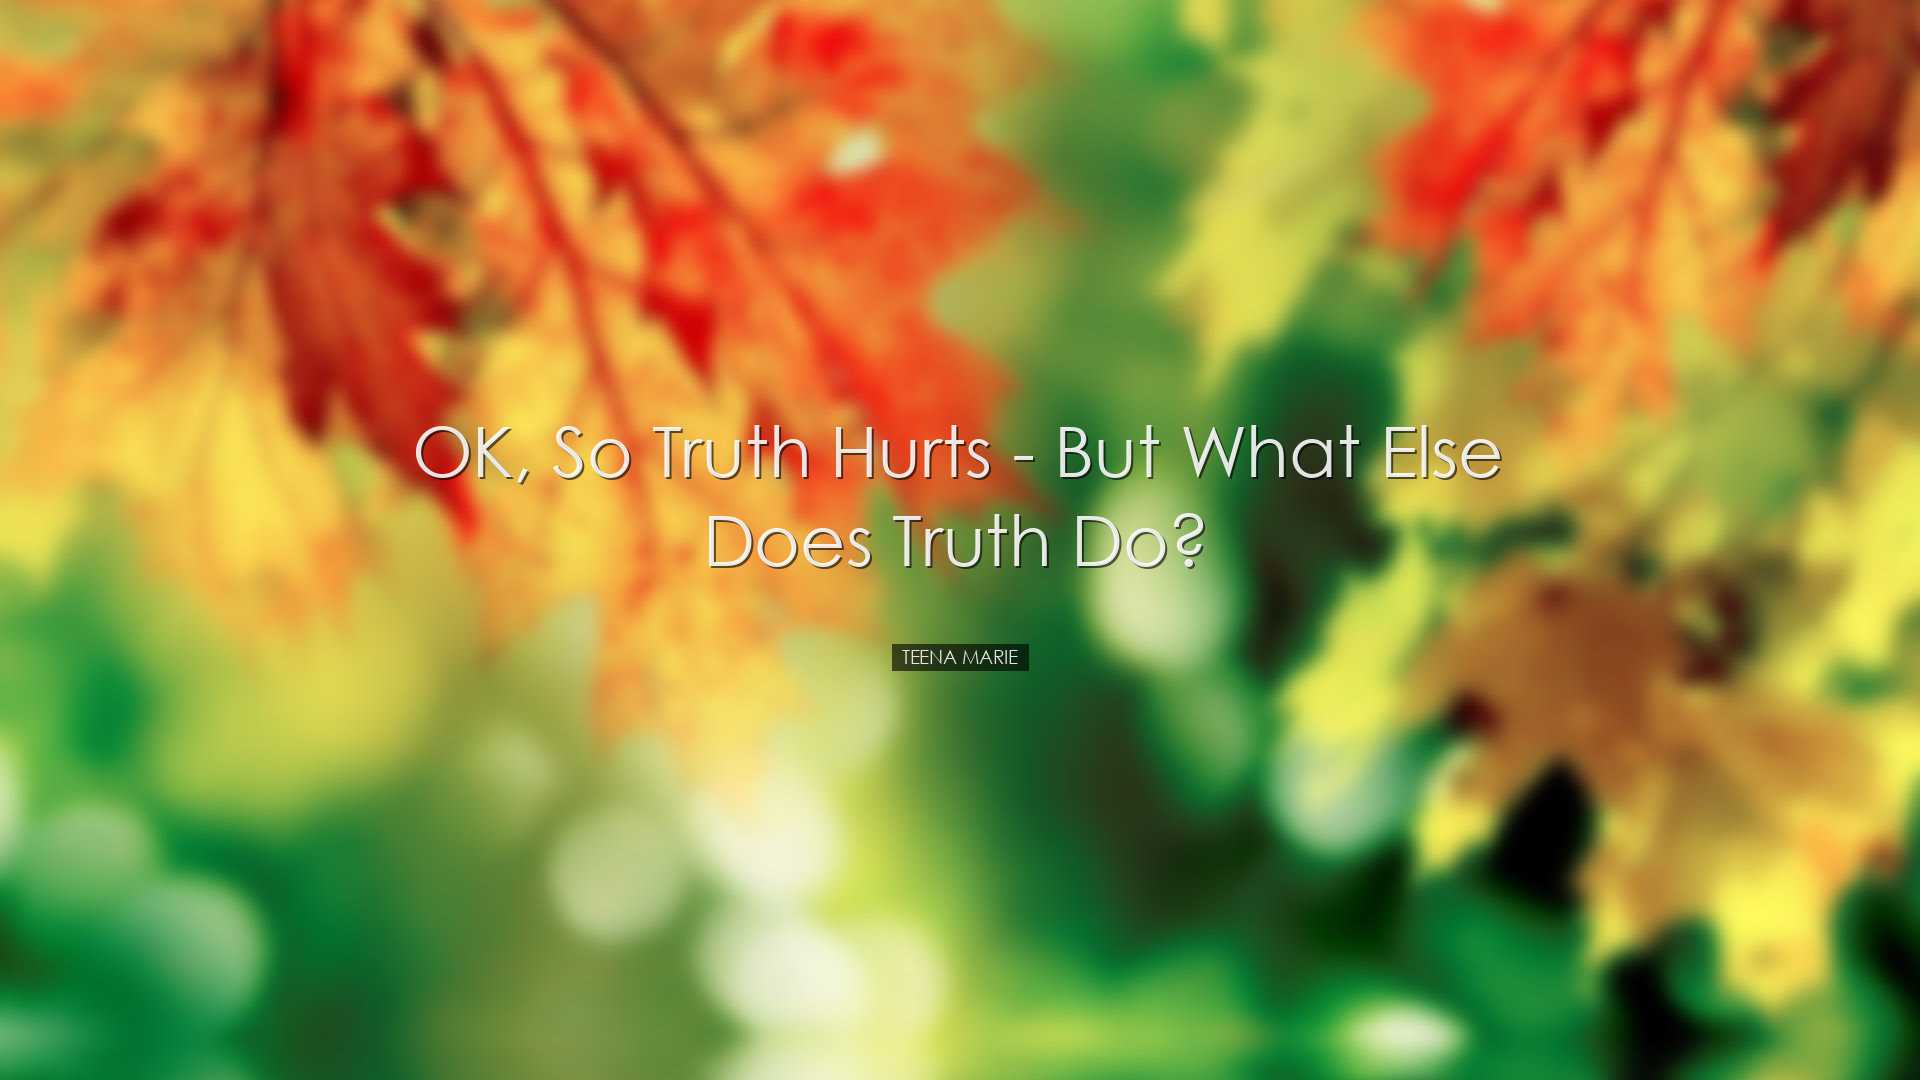 OK, so truth hurts - but what else does truth do? - Teena Marie